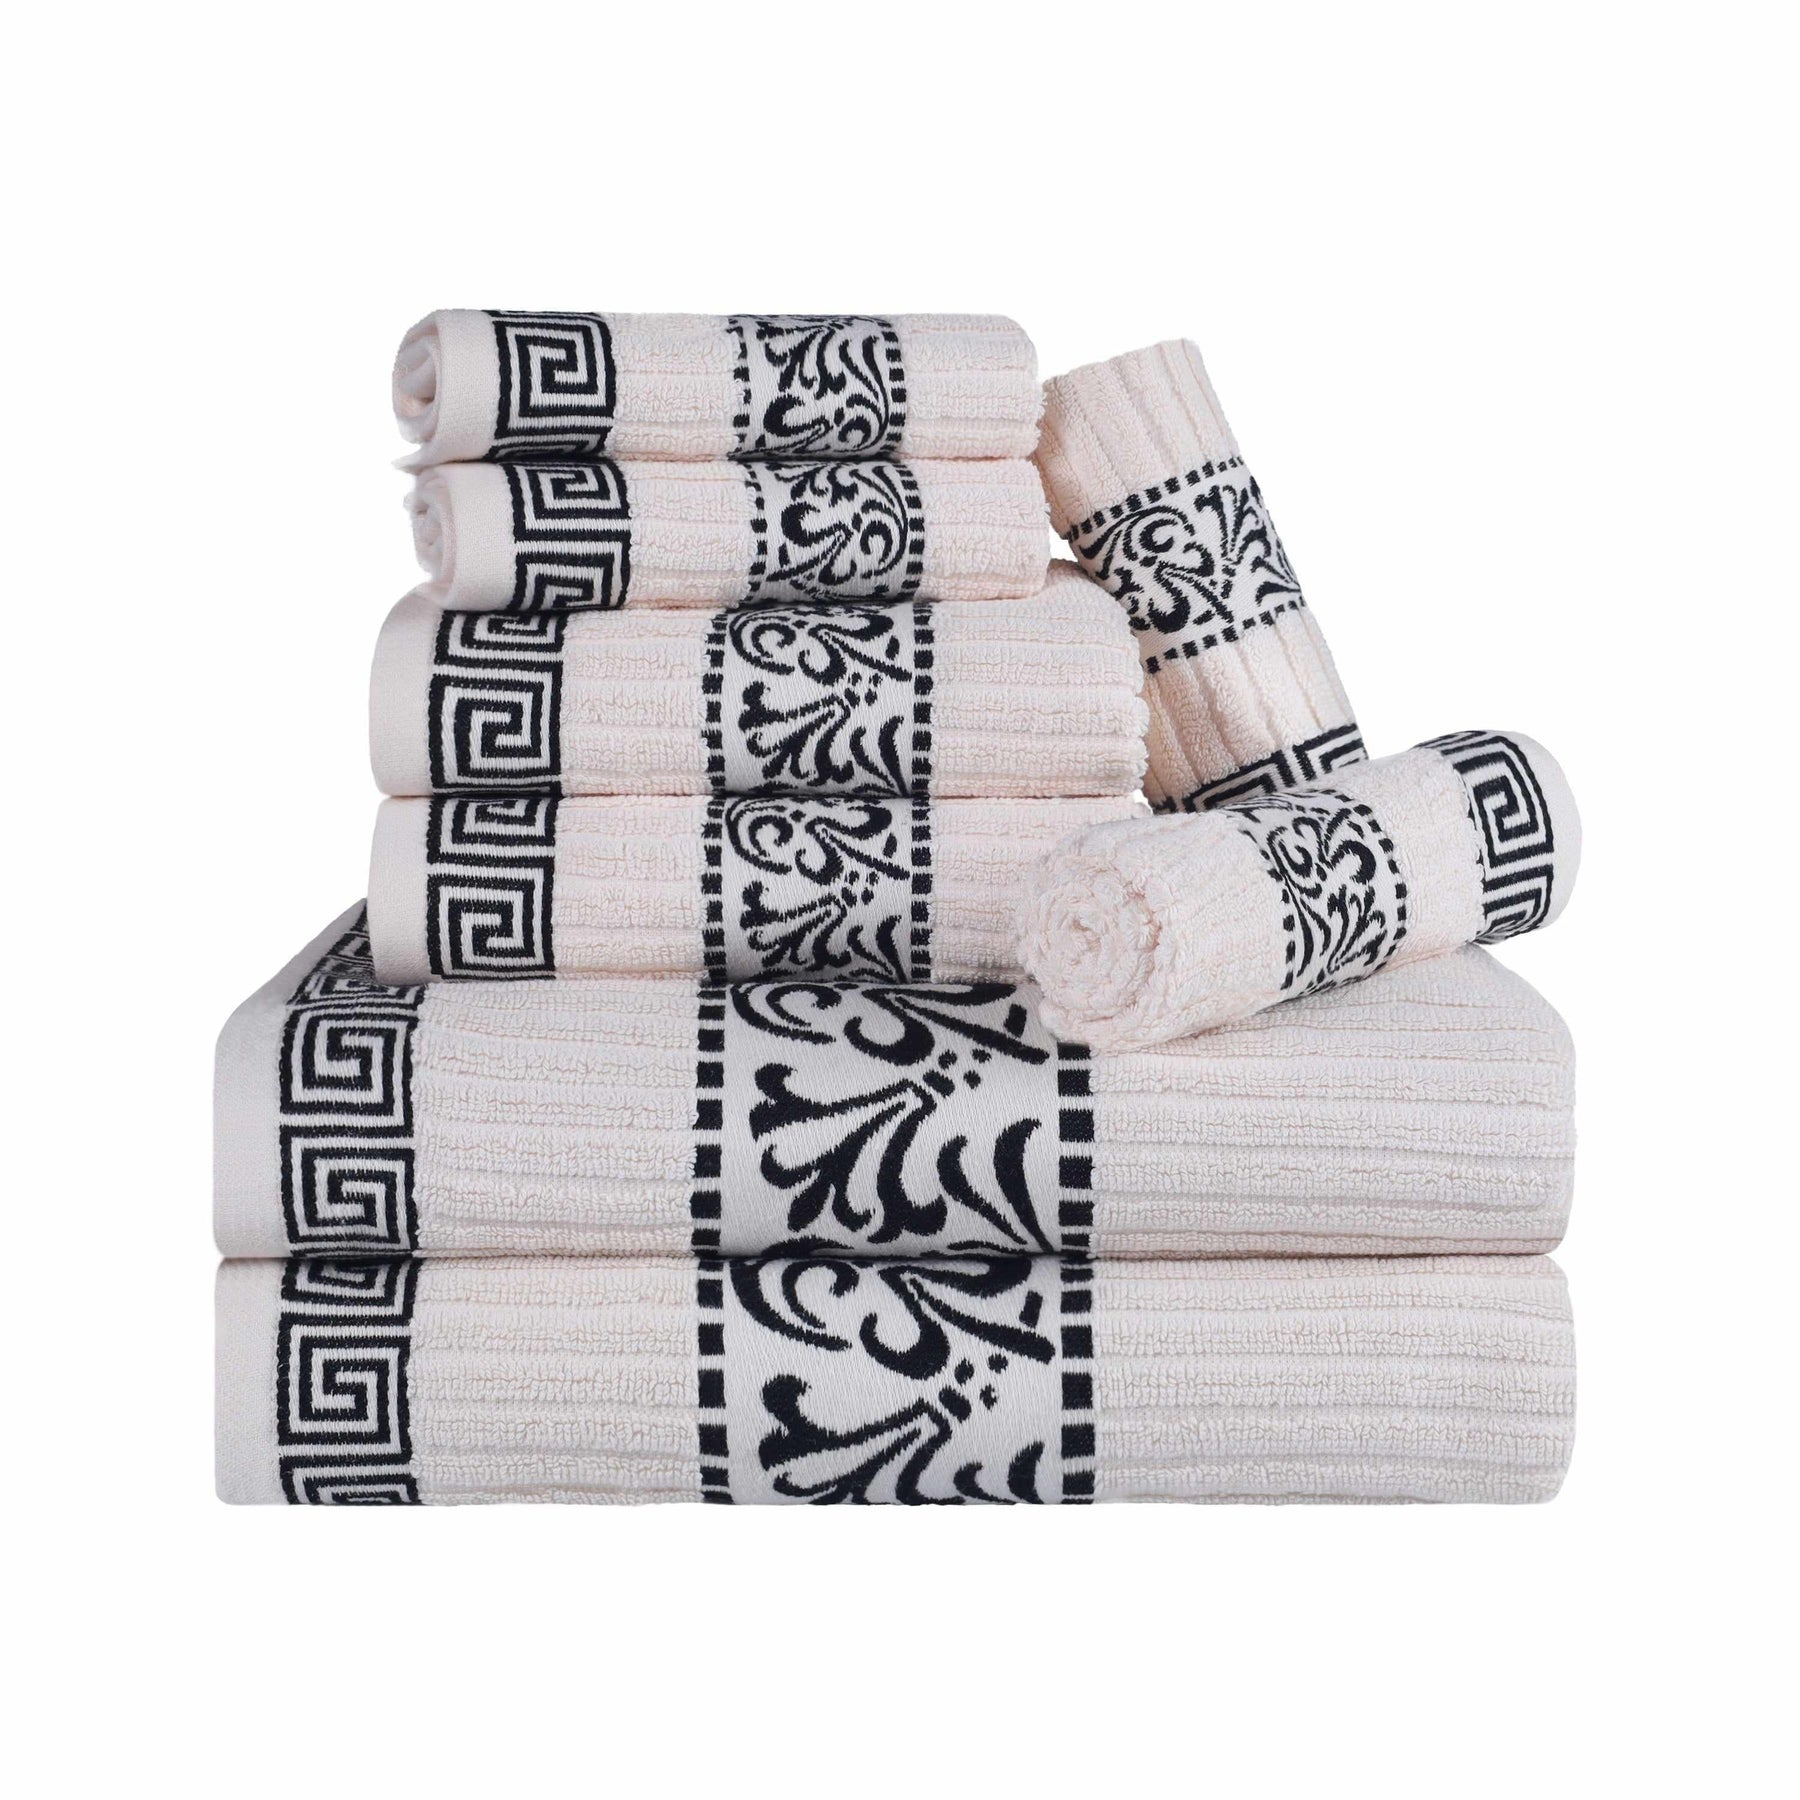 Superior Athens Cotton 8-Piece Towel Set with Greek Scroll and Floral Pattern - Ivory-Black